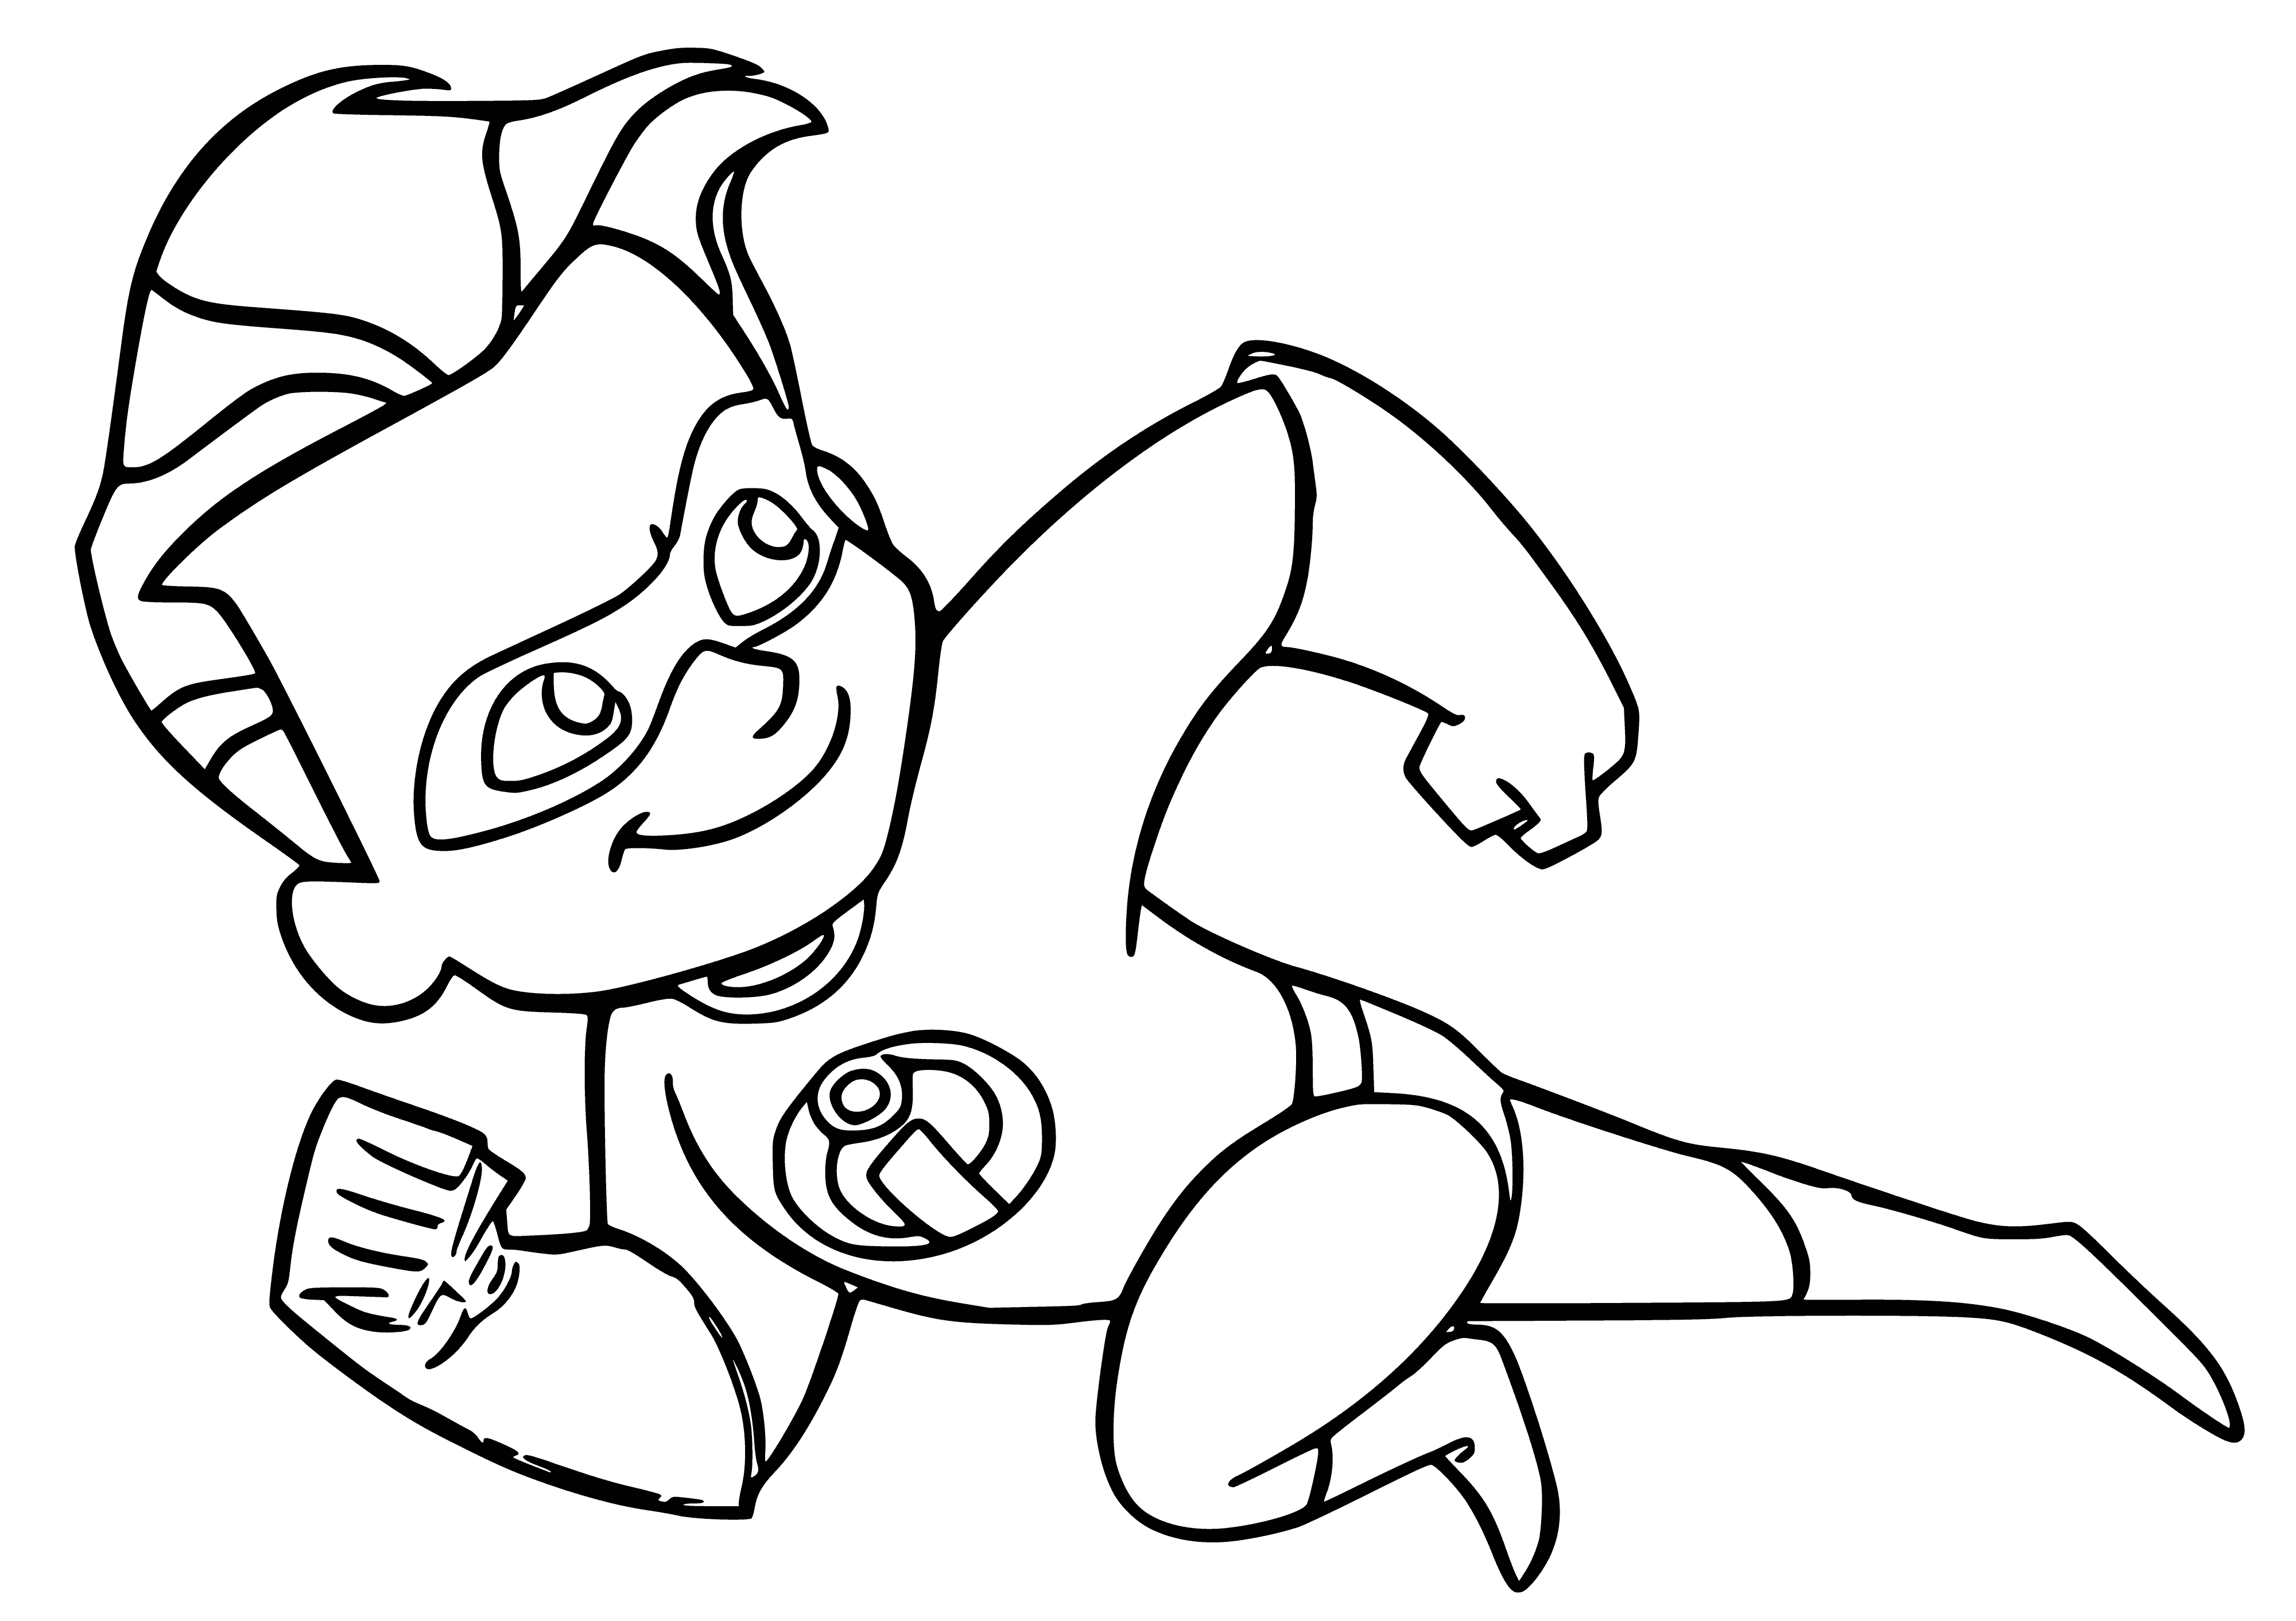 Superfast Shastik coloring page